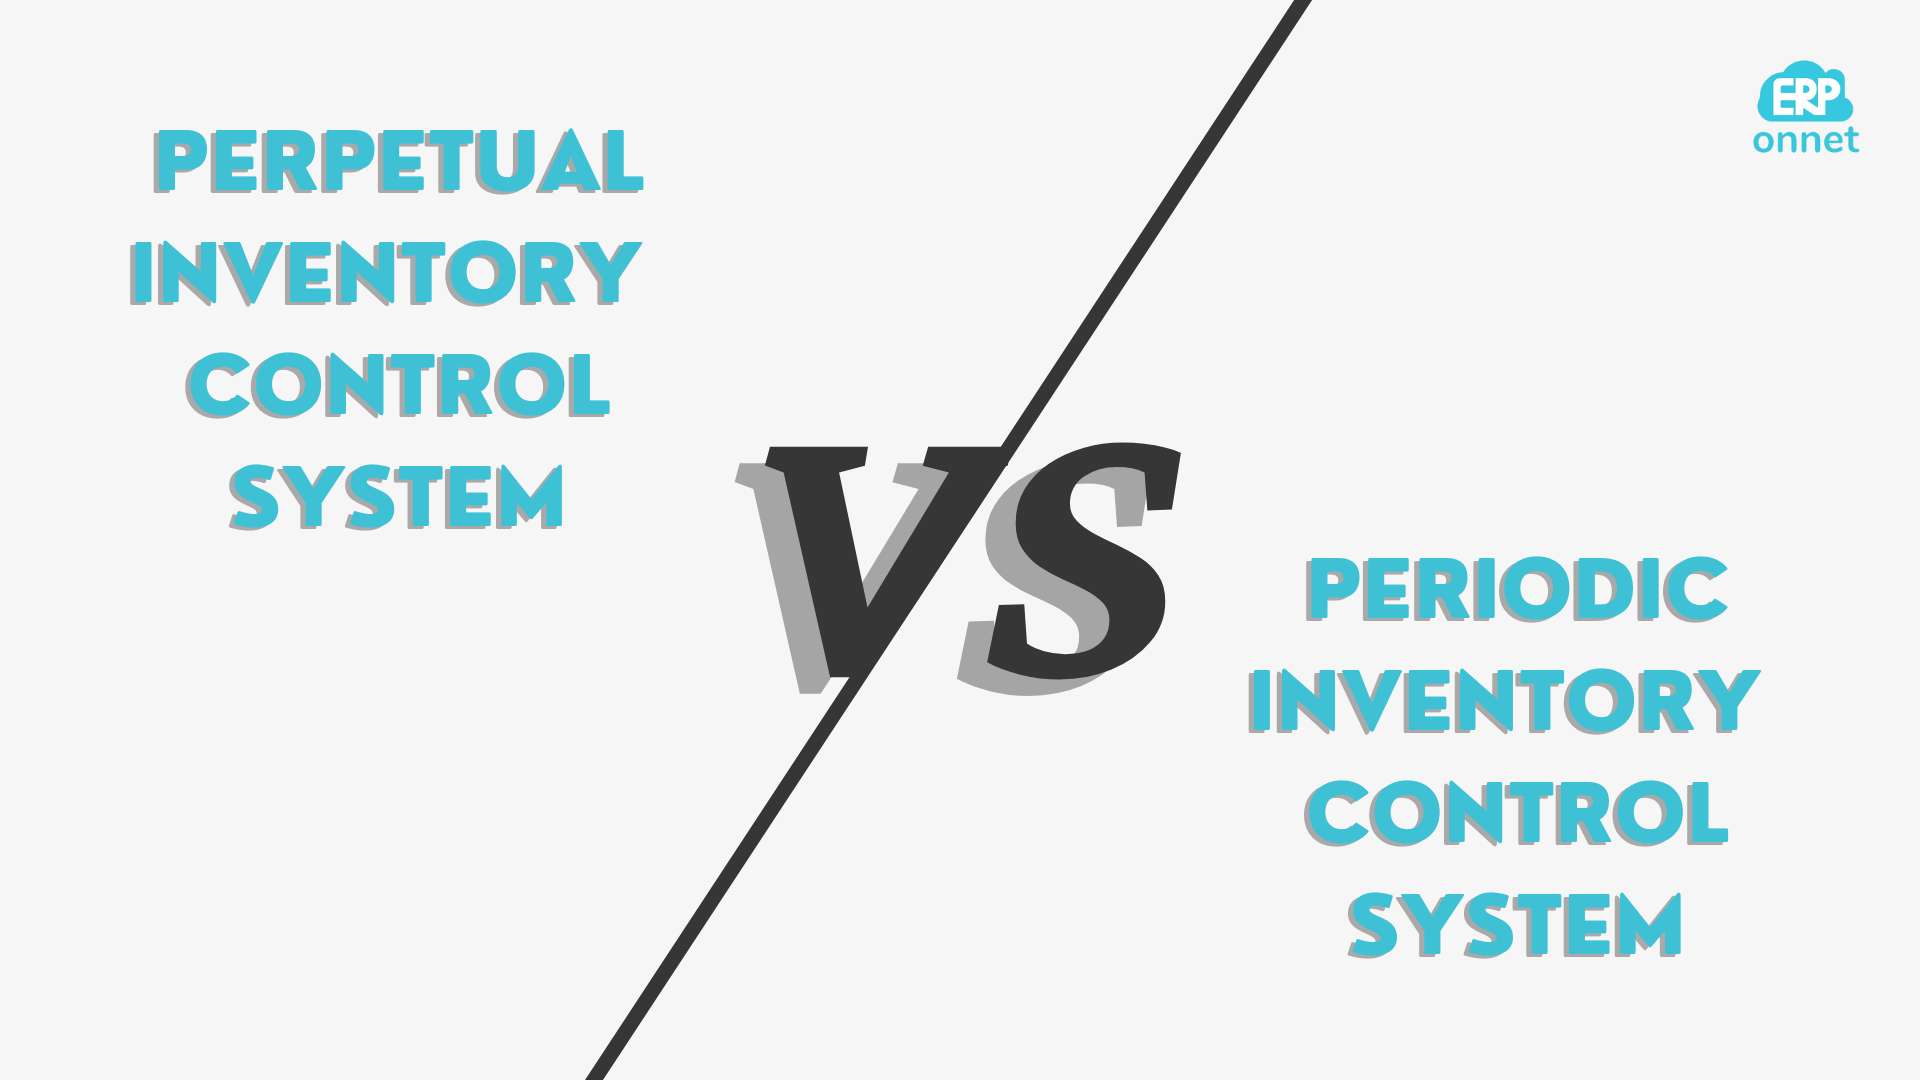 Compare perpetual inventory control system and periodic inventory control system